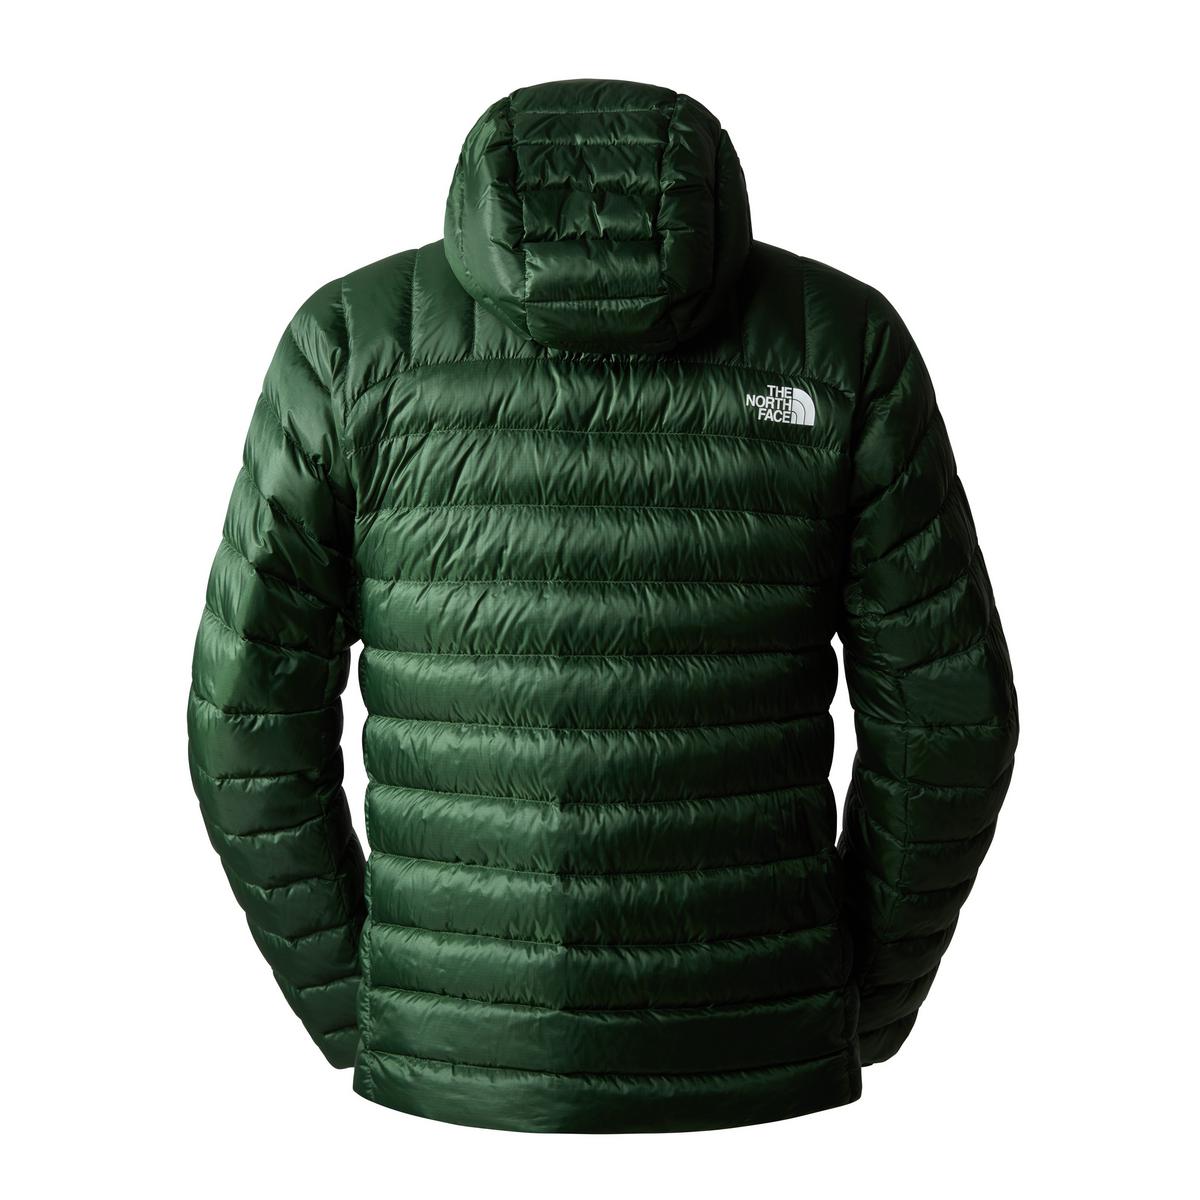 The North Face Men's Summit Breithorn Hoodie - Green